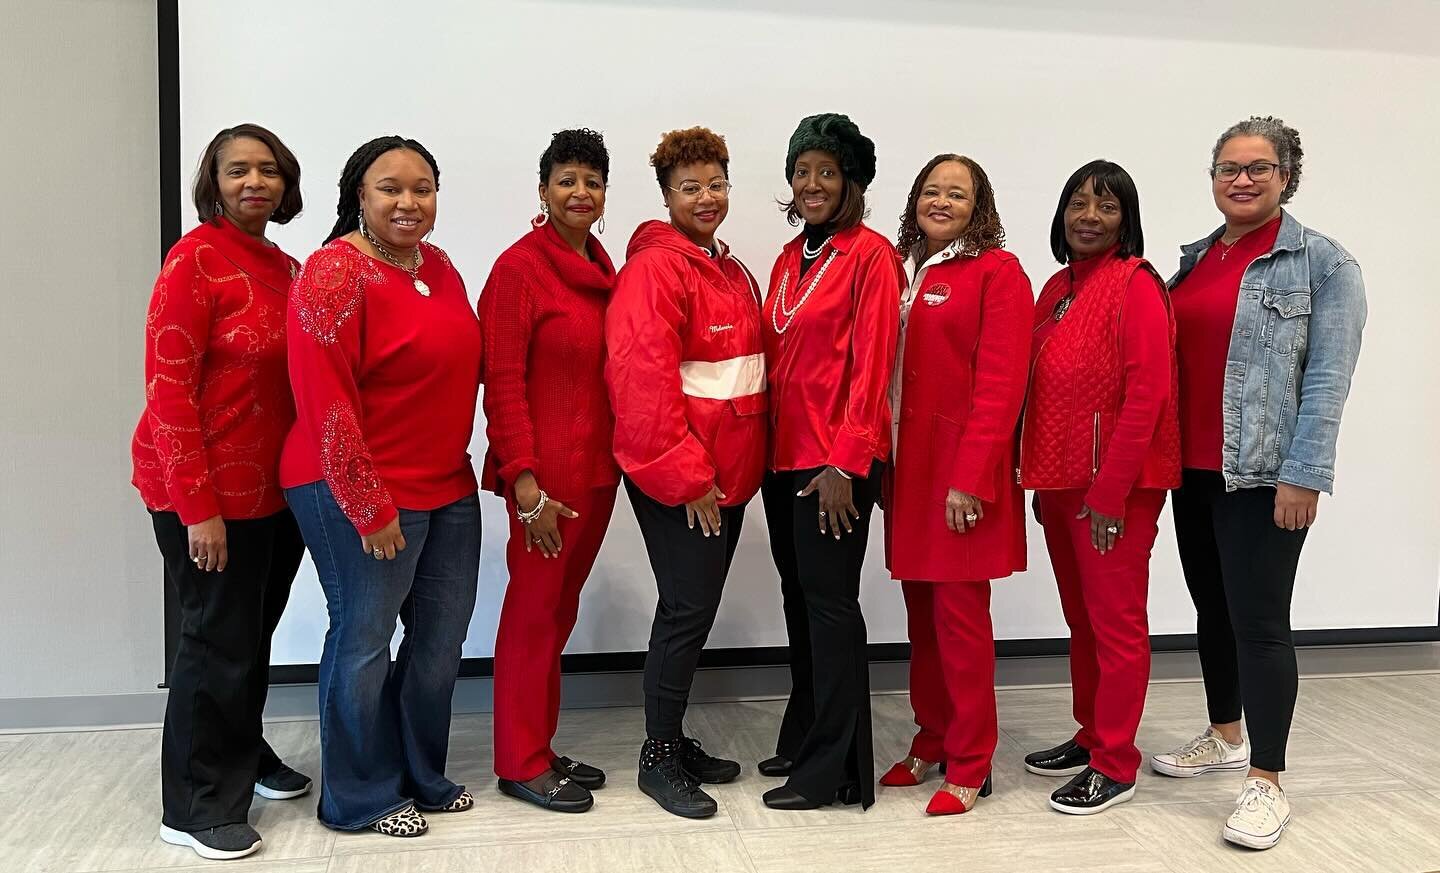 Green goes Red today as the Aiken (SC) Chapter of The Links, Incorporated joined with The Aiken Alumnae Chapter of Delta Sigma Theta Sorority, Incorporated to hold an informative and interactive event for American Heart Month. Special thank you to ou